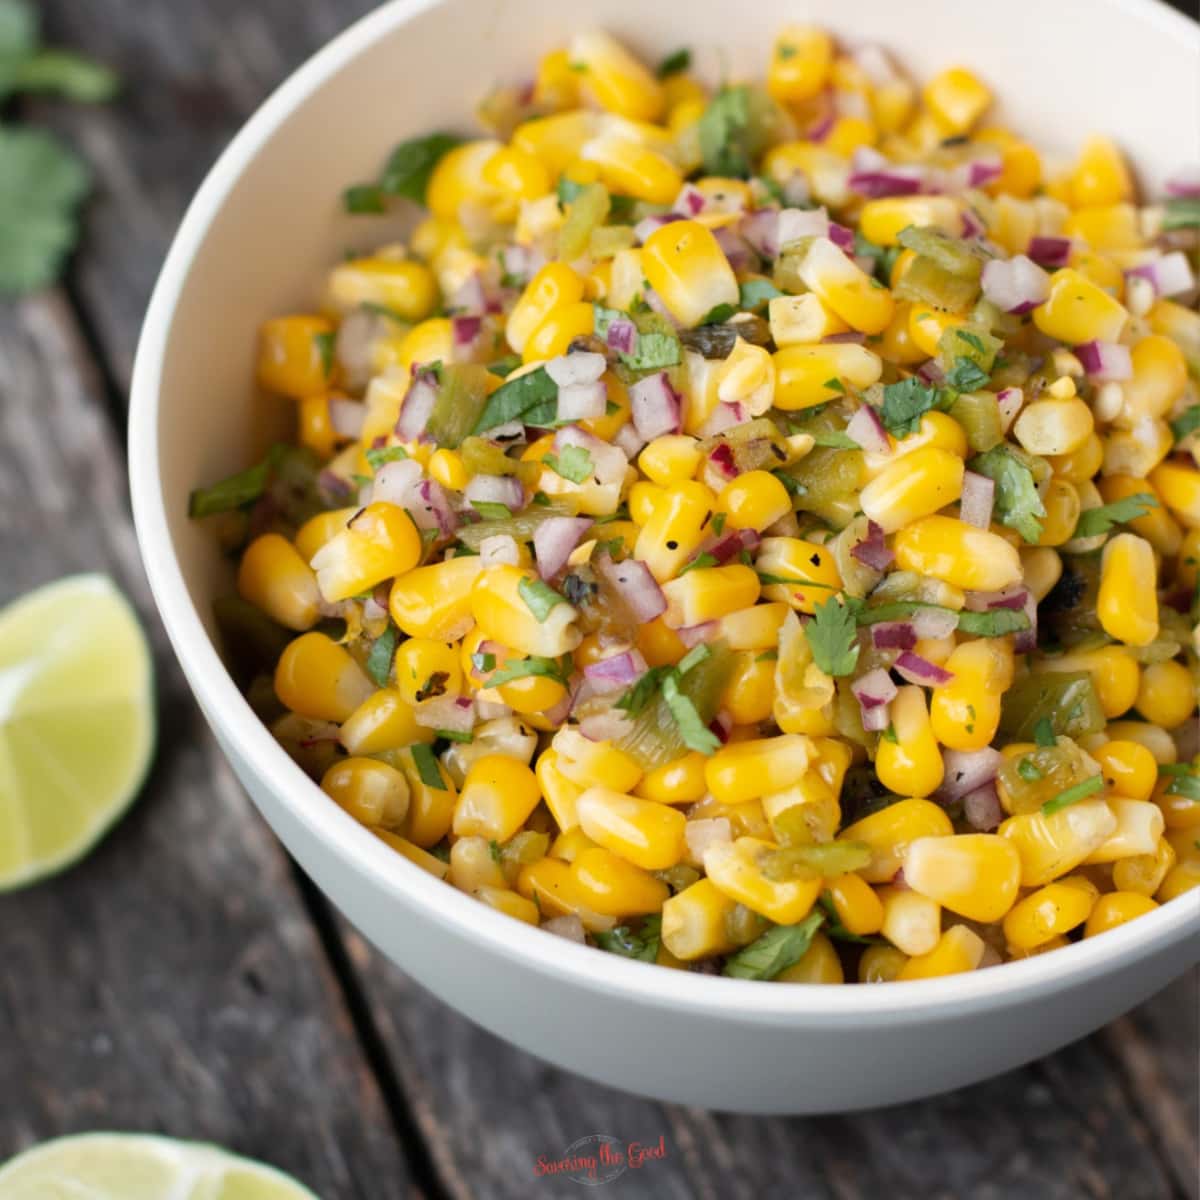 chipotle corn slasa in a white bowl showing texture of the salsa, limes in the background, square image